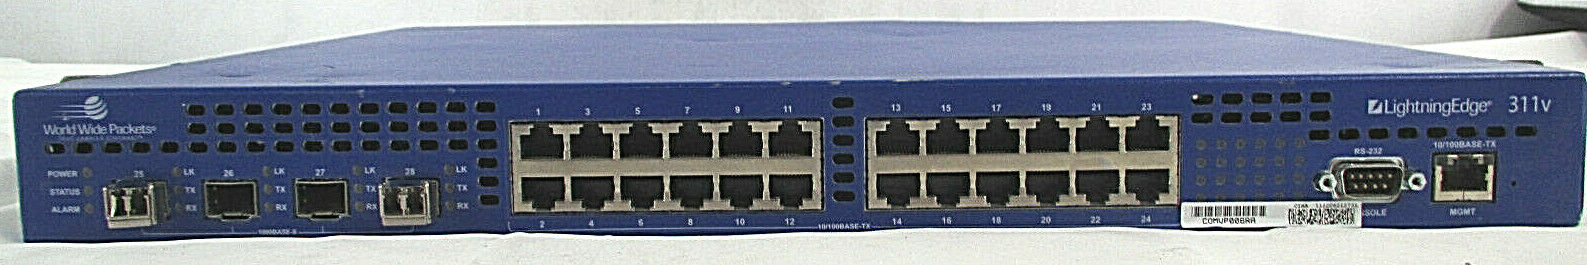 World Wide Packets Ciena LEAC -0311VB Ethernet Switch~ For PARTS/ REPAIR